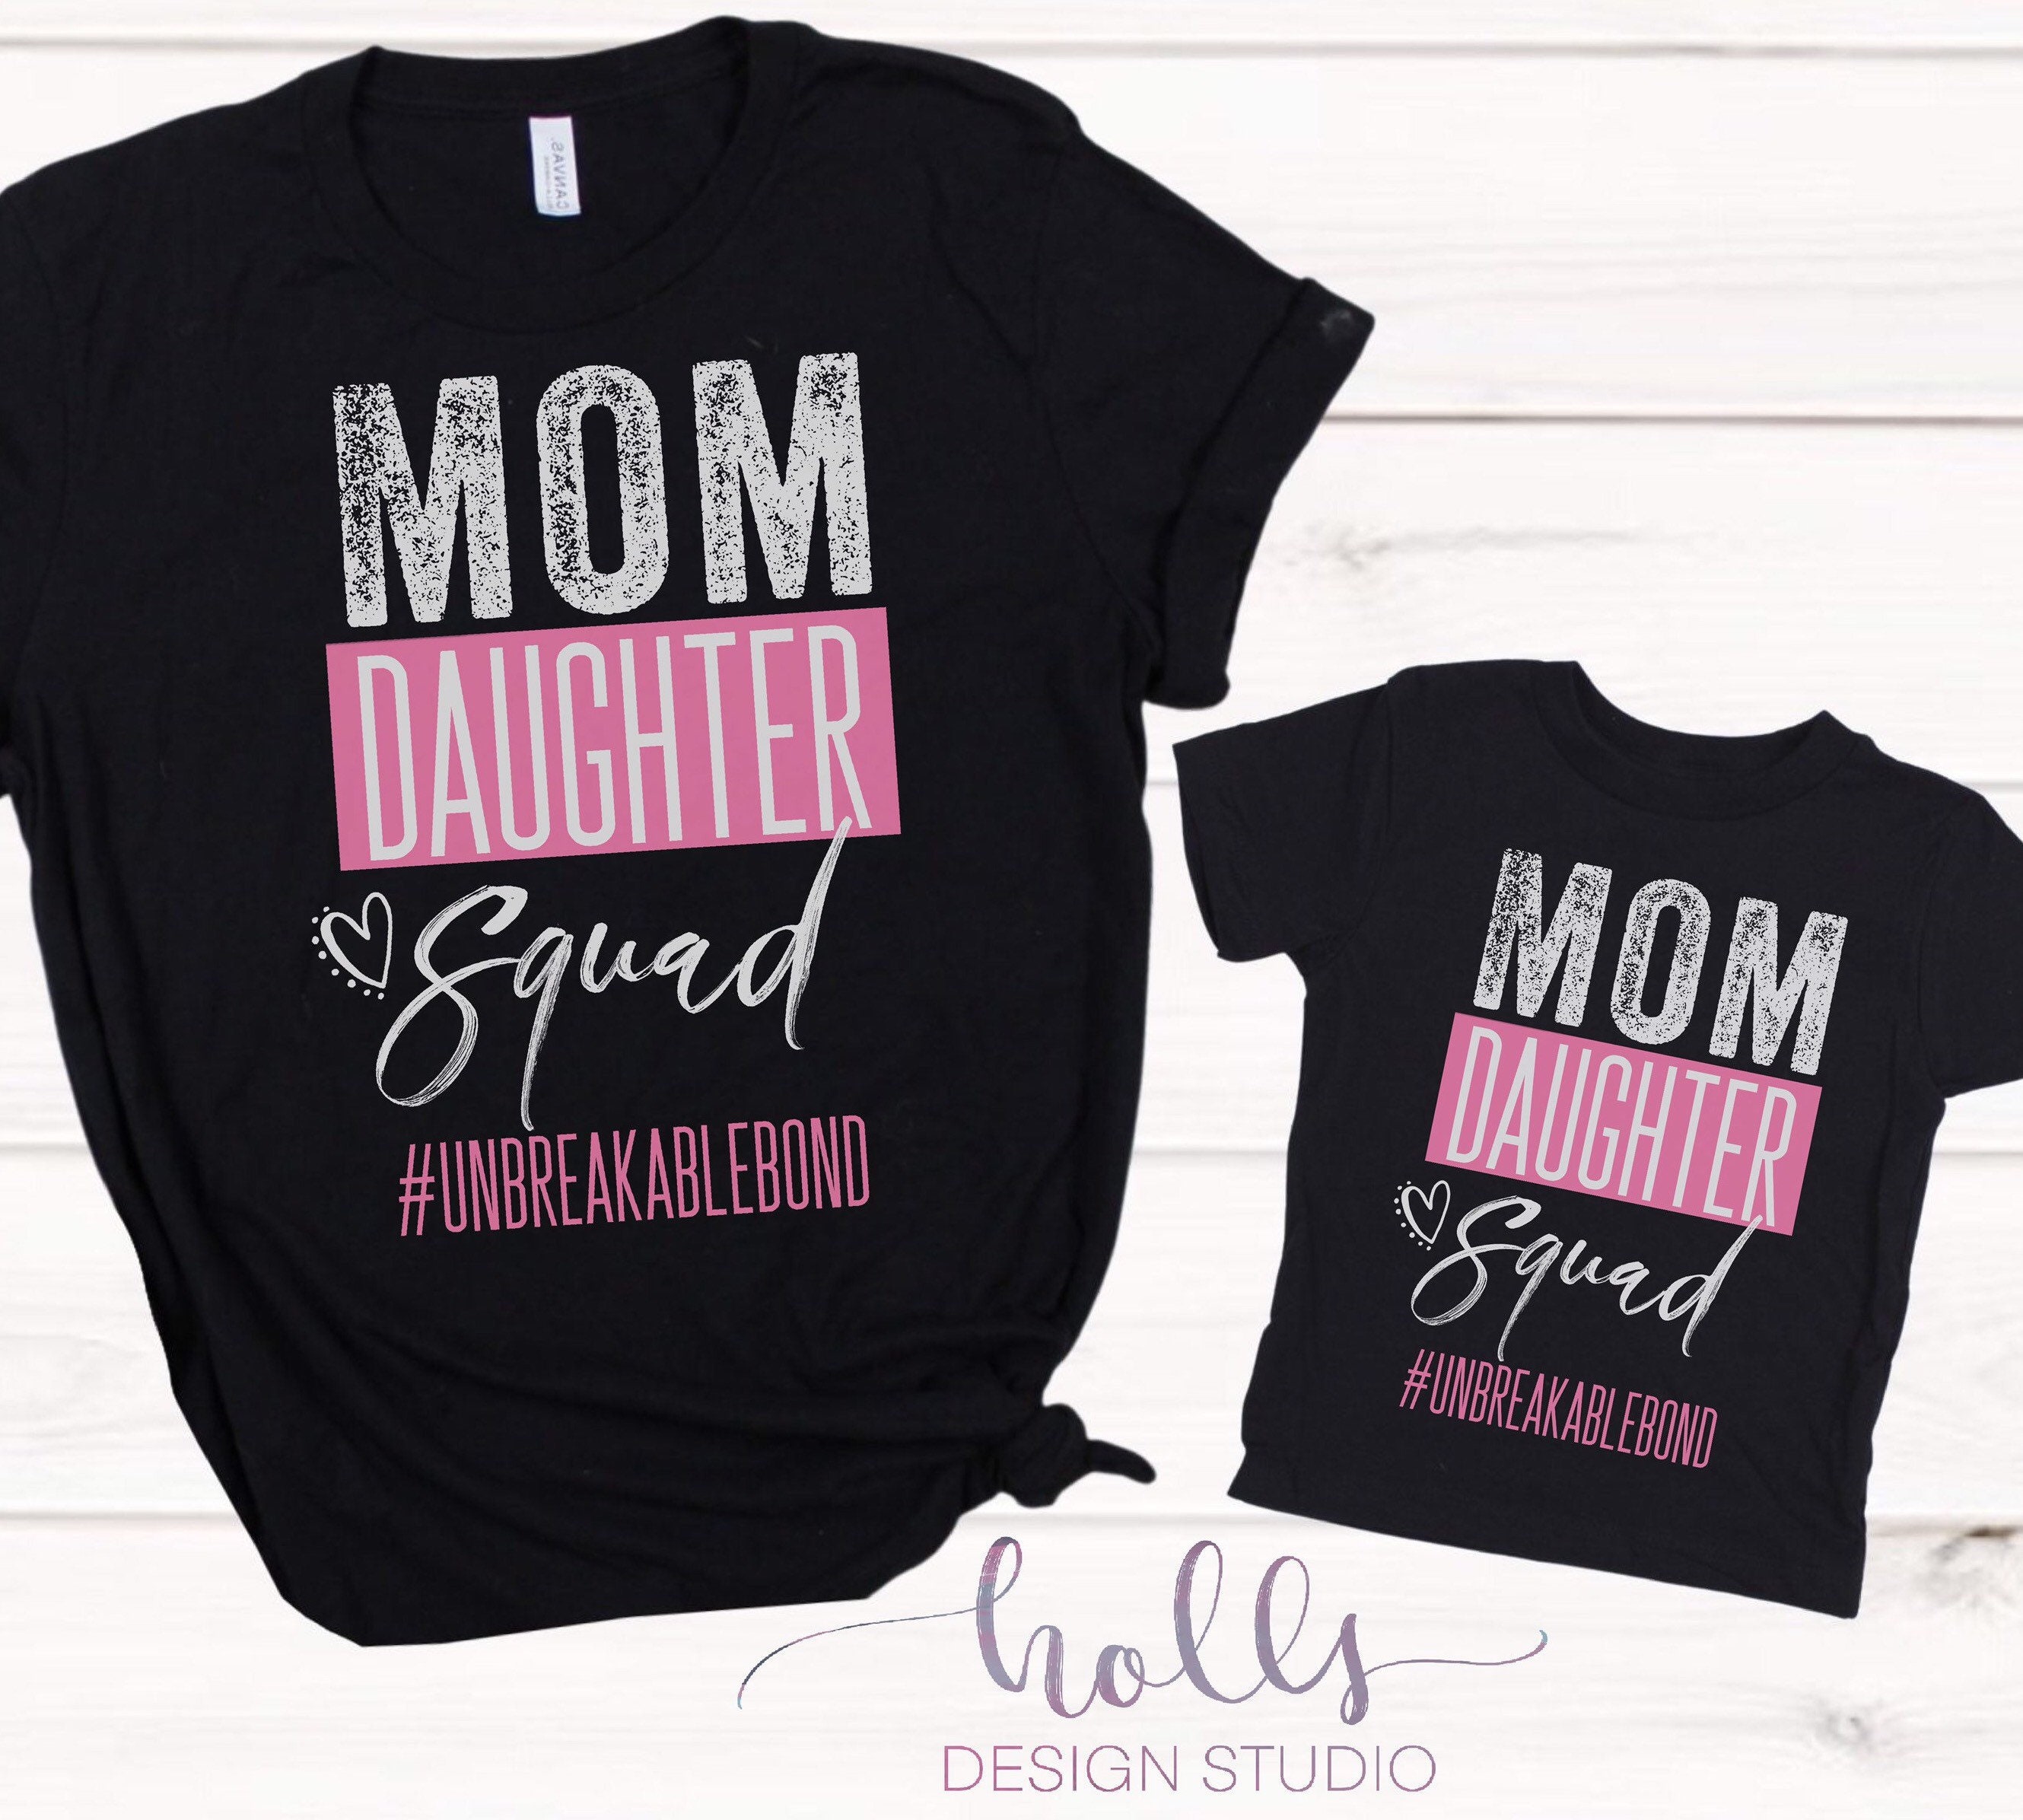 Cool Mothers Day Design Recruiter Mom T-Shirt